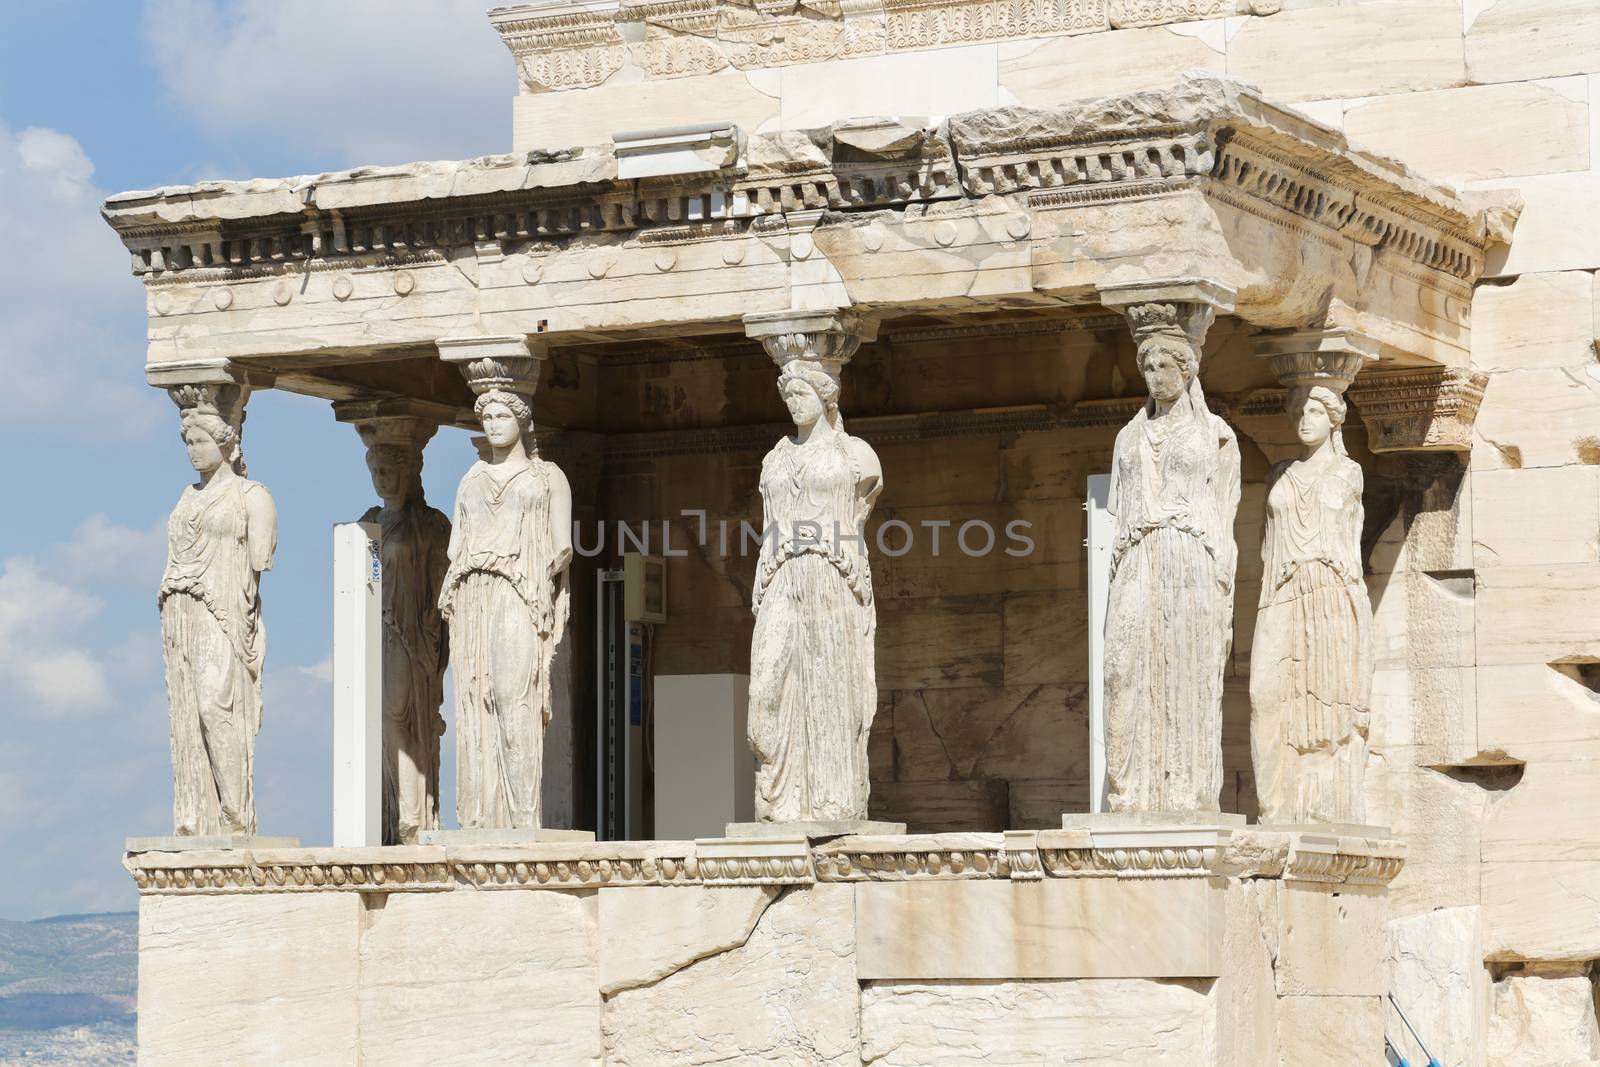 The Porch of the Caryatids by Kartouchken